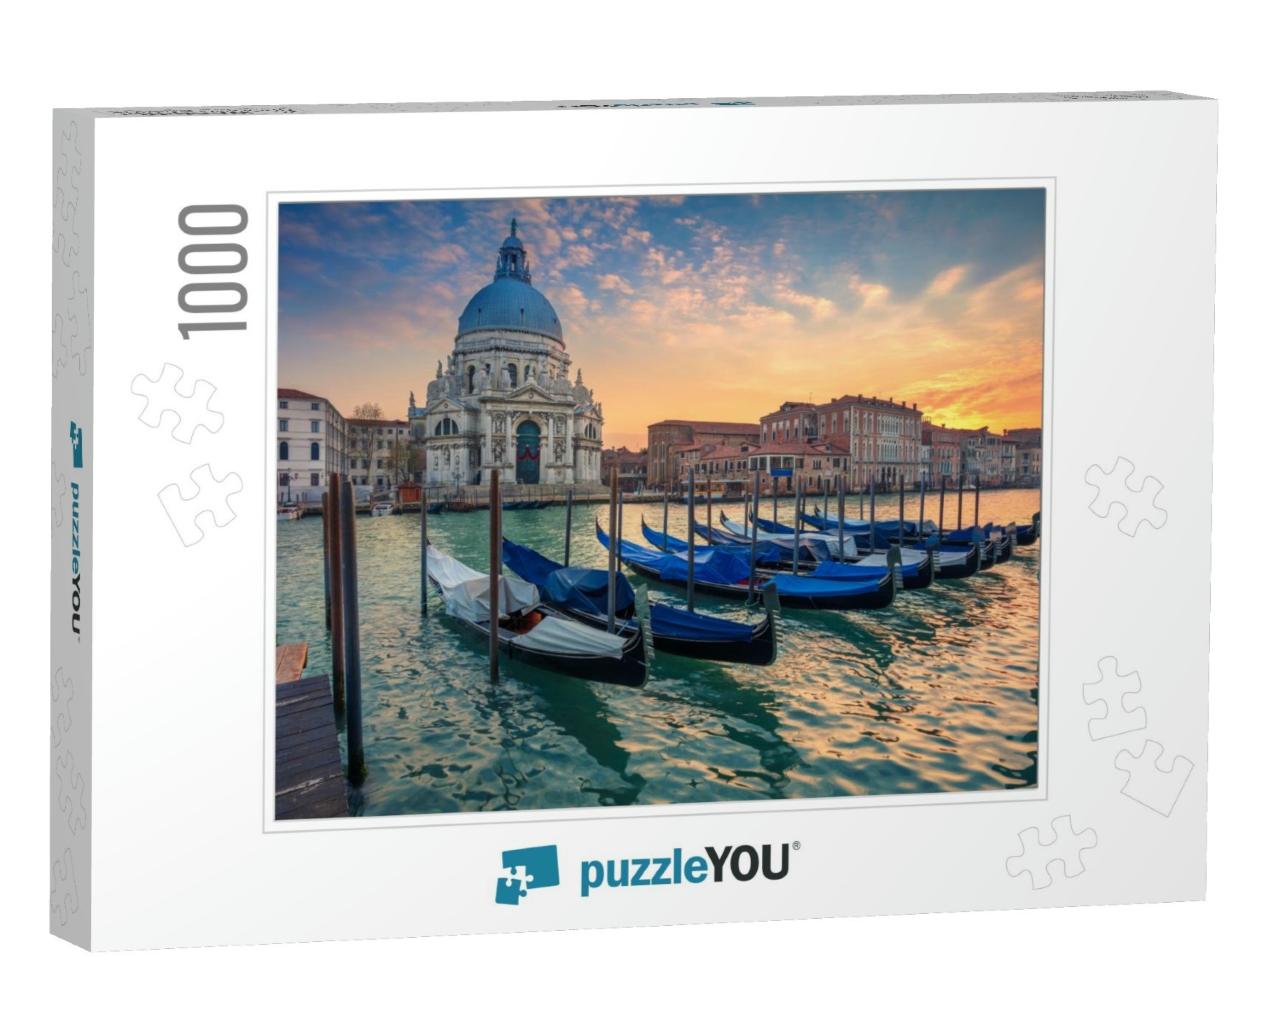 Venice. Cityscape Image of Grand Canal in Venice, with Sa... Jigsaw Puzzle with 1000 pieces